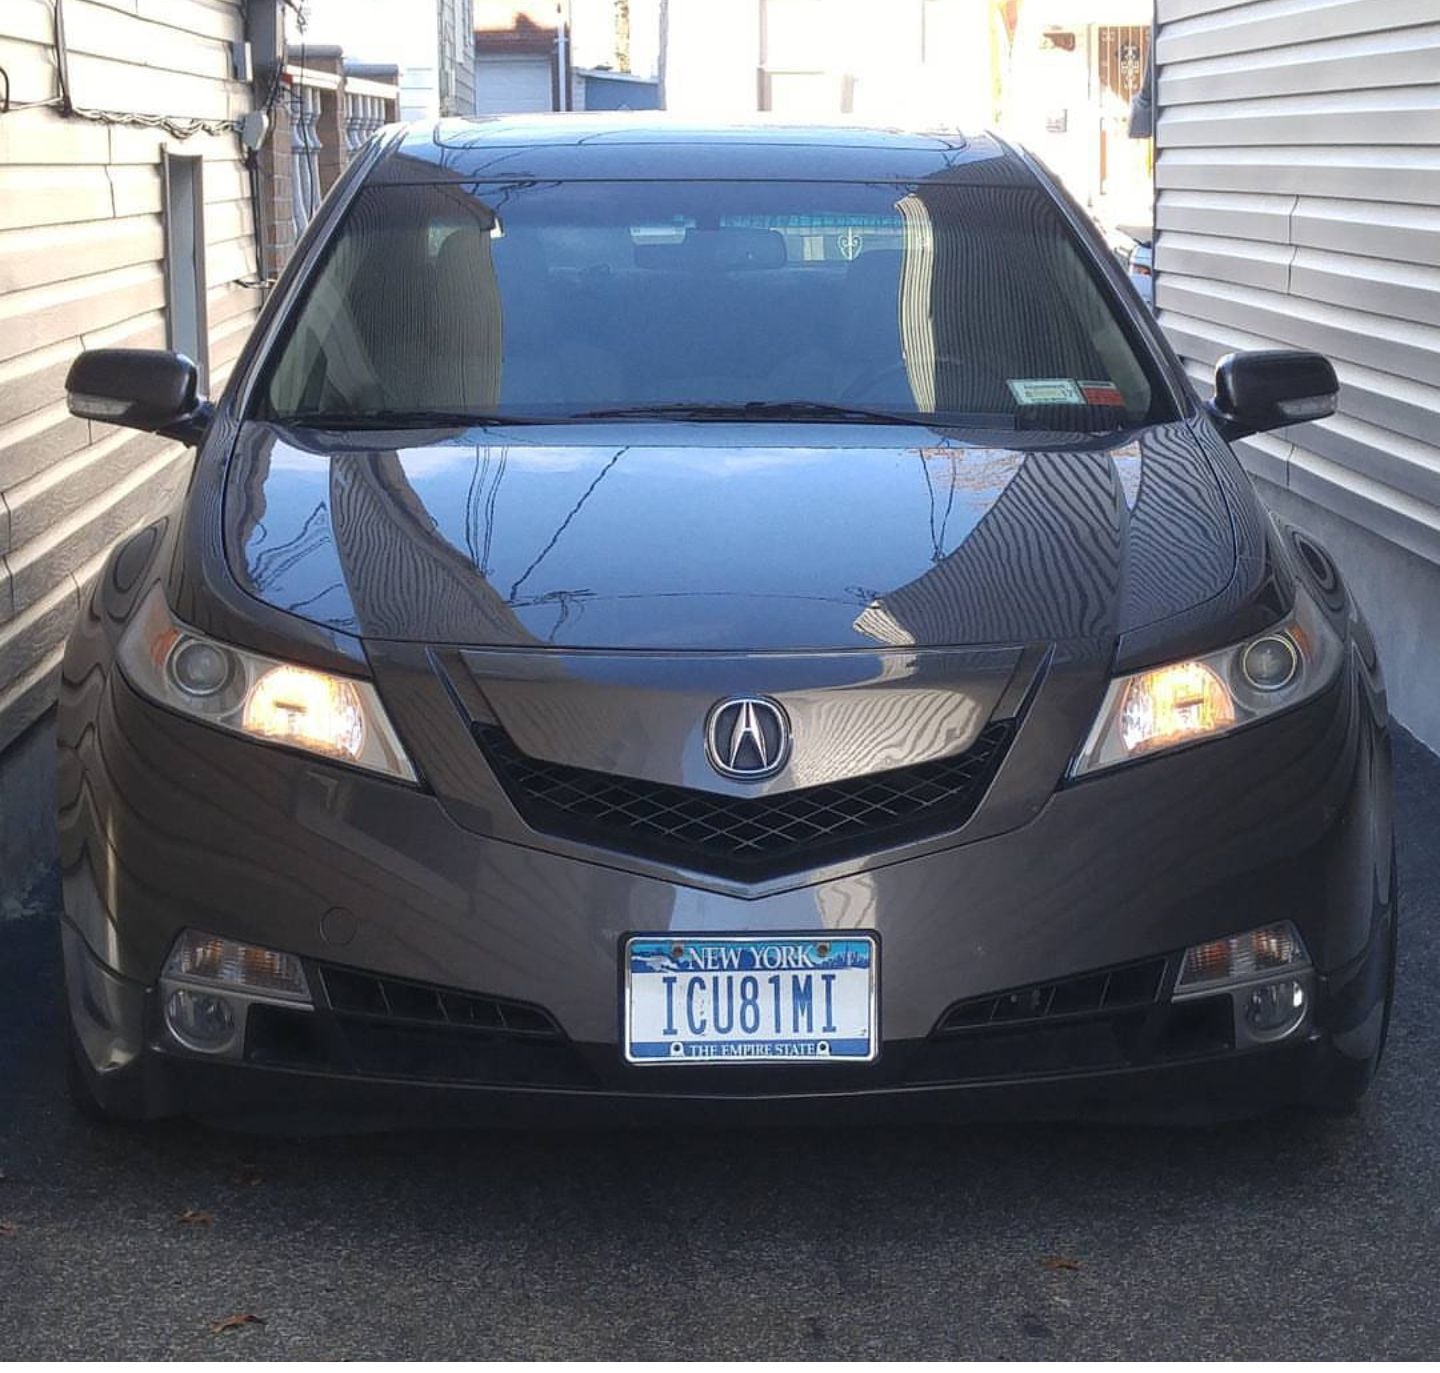 2011 Acura TL - SOLD: 2011 Acura TL SH-AWD with Technology Package-low miles,1 owner,great shape, NYC - Used - VIN 19UUA9F55BA001472 - 63,000 Miles - 6 cyl - AWD - Automatic - Sedan - Gray - Bronx, NY 10465, United States